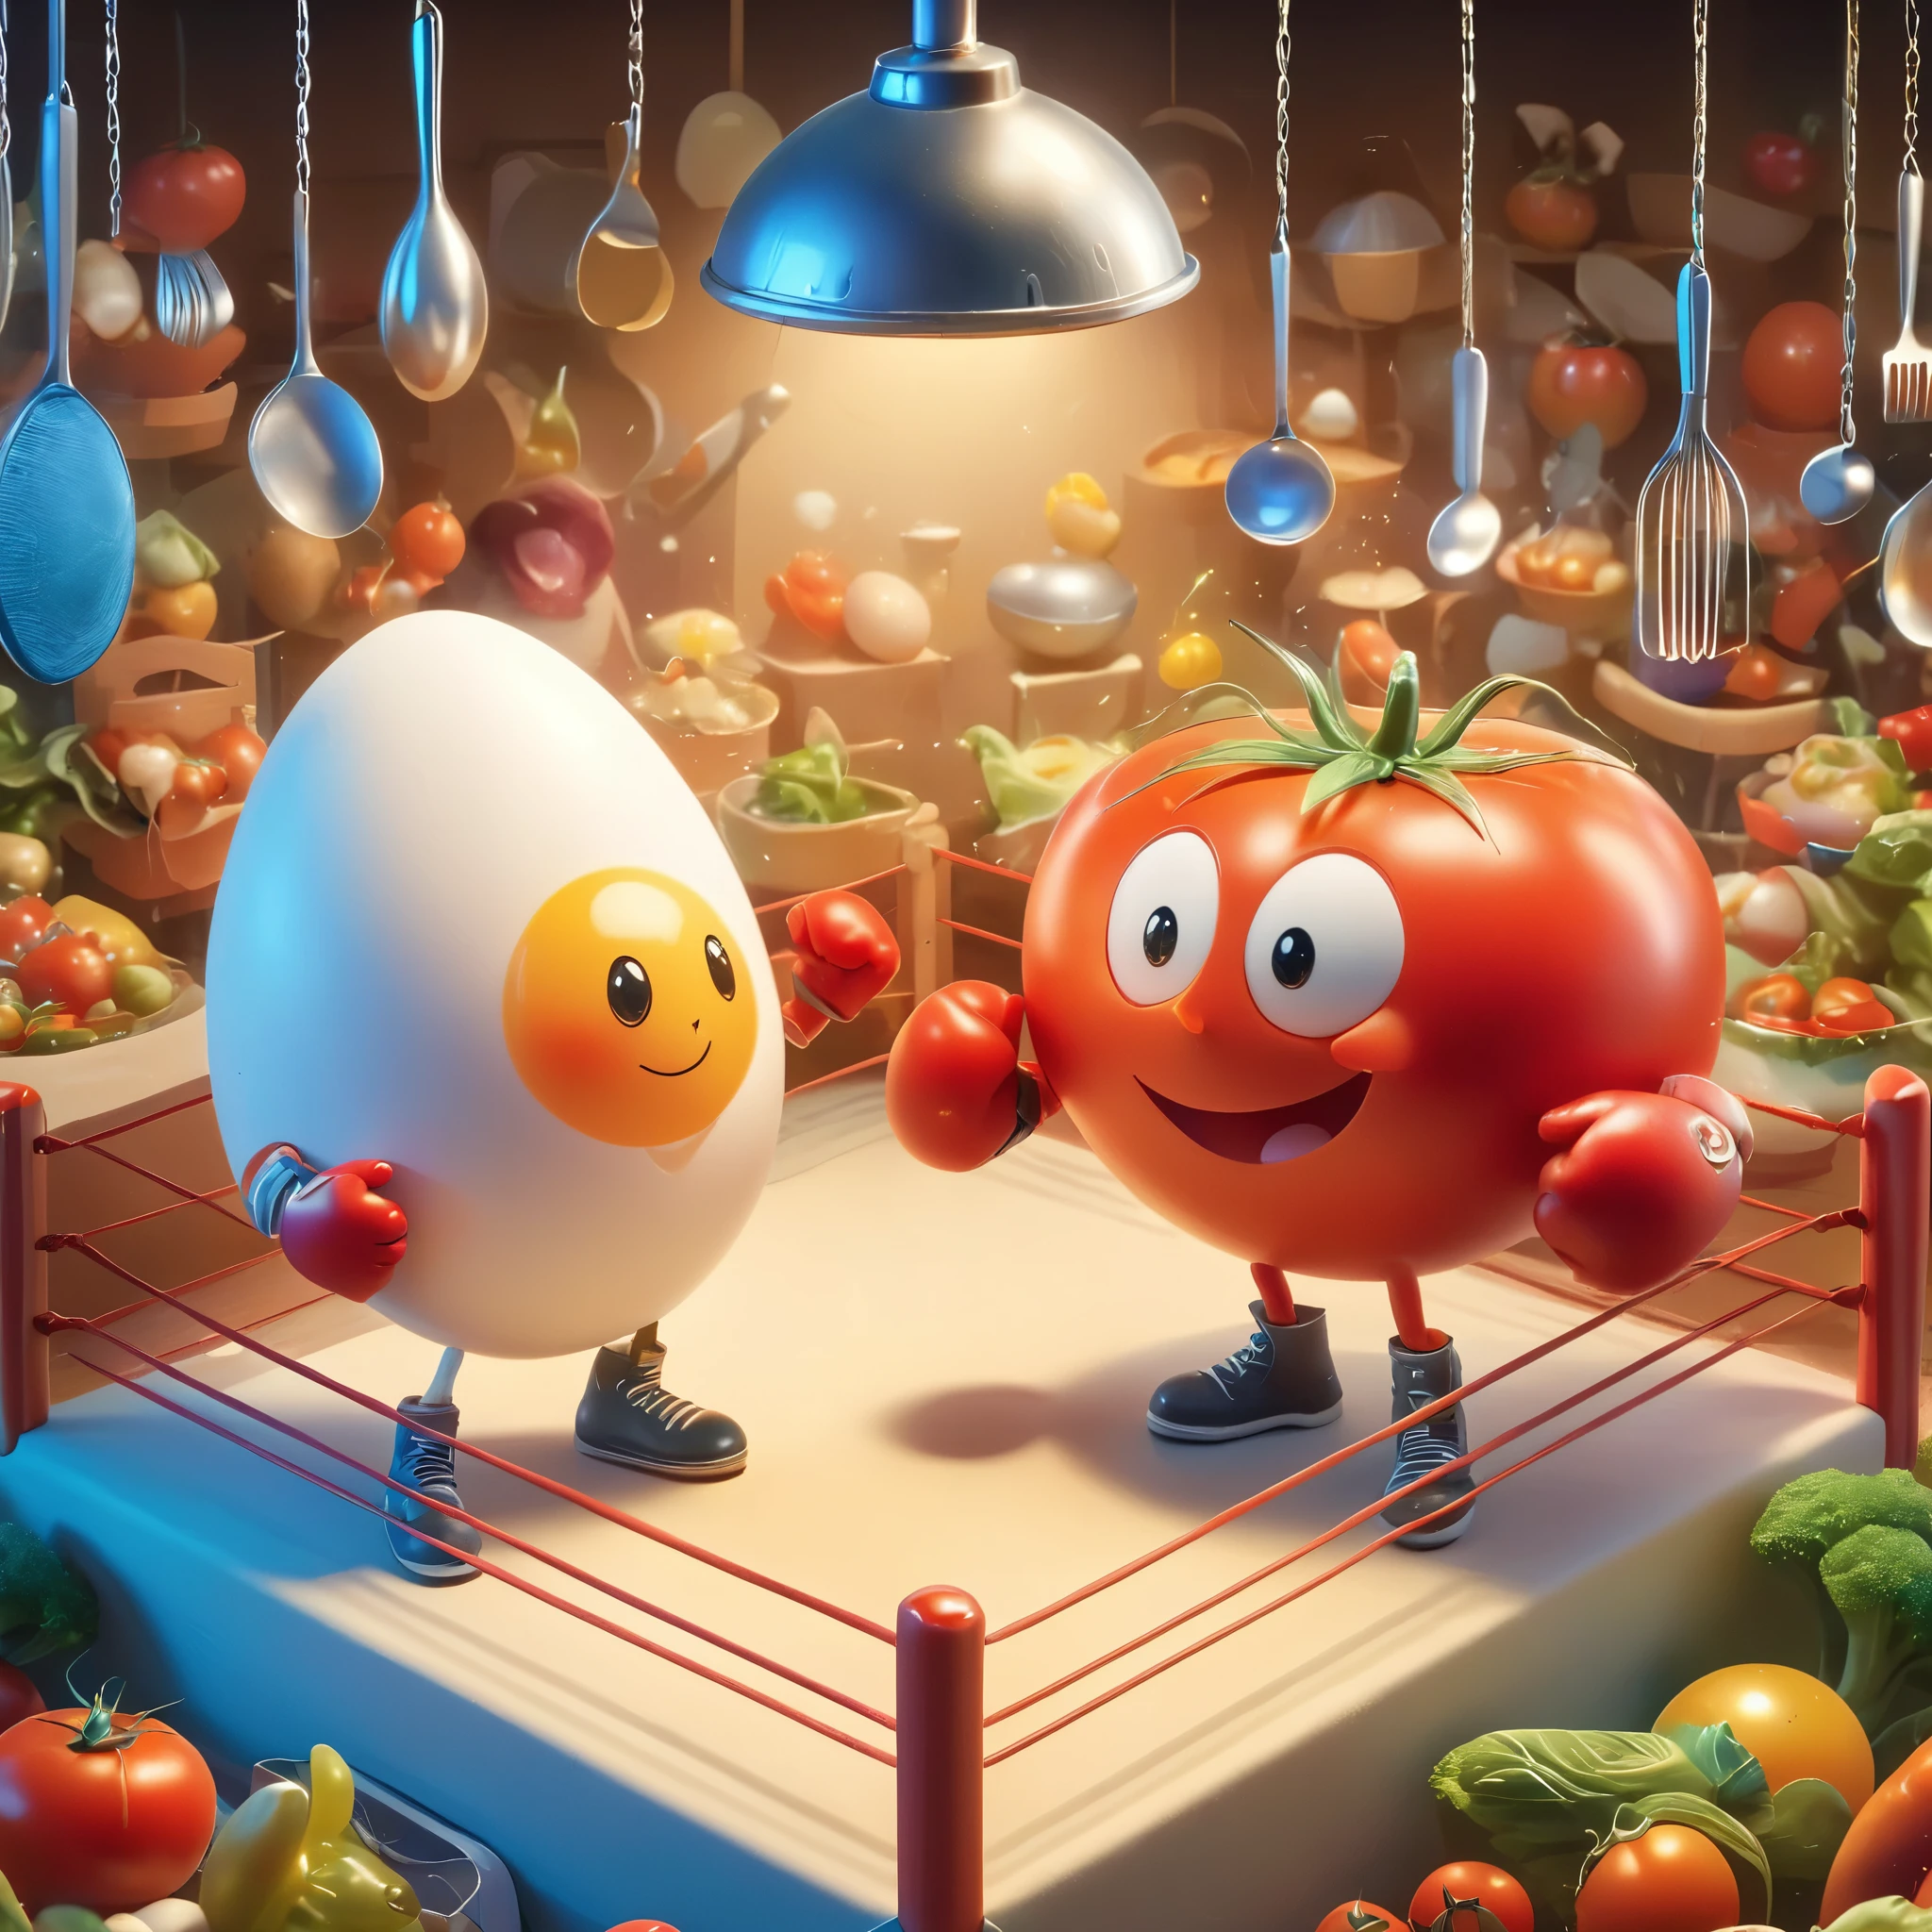 Imagine a whimsical scene where a charming egg and a plump tomato stand in a boxing ring, poised for a friendly bout. The egg, sporting miniature gloves and a determined smile, faces its opponent, the tomato, which wears its own set of gloves, its stem resembling a jaunty little hat. The ring is set in a kitchen-like arena, with utensils hanging on the walls and an audience of various fruits and vegetables cheering with childlike enthusiasm. The colors are vibrant and cartoonish, with exaggerated expressions and movements that capture the innocence of childhood and the spirit of camaraderie. The entire composition is lively and animated, as if the egg and tomato are not just food items, but beloved characters in their own right, engaging in a playful spar that symbolizes their unique friendship.